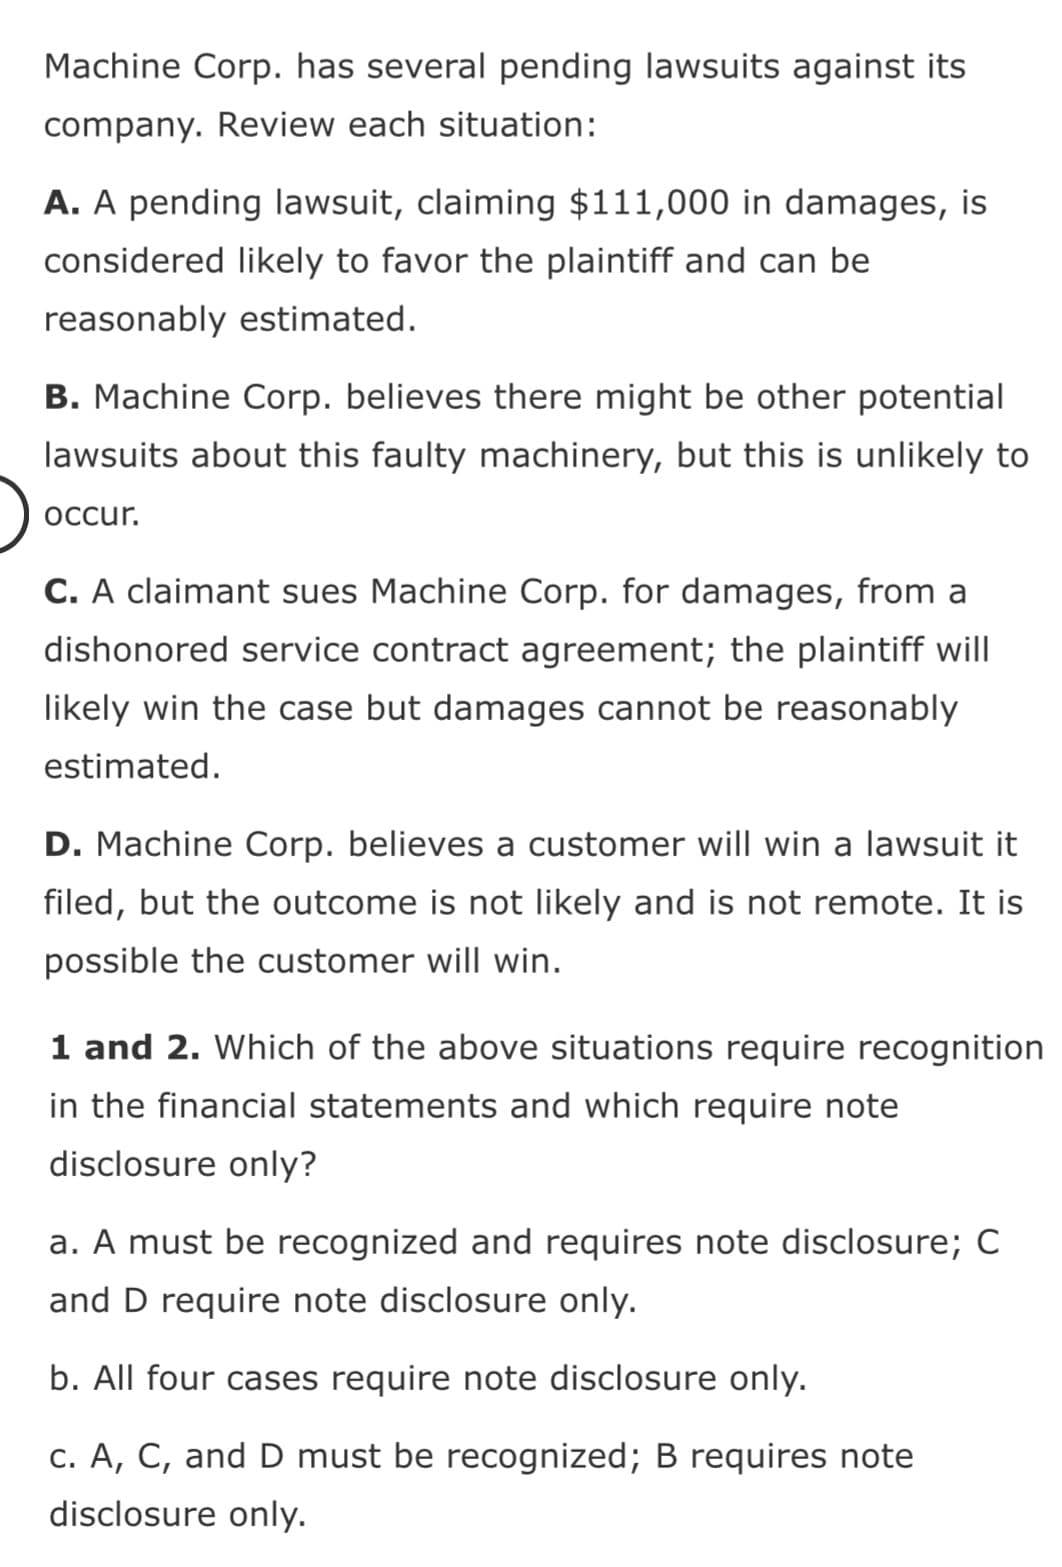 Machine Corp. has several pending lawsuits against its
company. Review each situation:
A. A pending lawsuit, claiming $111,000 in damages, is
considered likely to favor the plaintiff and can be
reasonably estimated.
B. Machine Corp. believes there might be other potential
lawsuits about this faulty machinery, but this is unlikely to
occur.
C. A claimant sues Machine Corp. for damages, from a
dishonored service contract agreement; the plaintiff will
likely win the case but damages cannot be reasonably
estimated.
D. Machine Corp. believes a customer will win a lawsuit it
filed, but the outcome is not likely and is not remote. It is
possible the customer will win.
1 and 2. Which of the above situations require recognition
in the financial statements and which require note
disclosure only?
a. A must be recognized and requires note disclosure; C
and D require note disclosure only.
b. All four cases require note disclosure only.
c. A, C, and D must be recognized; B requires note
disclosure only.
